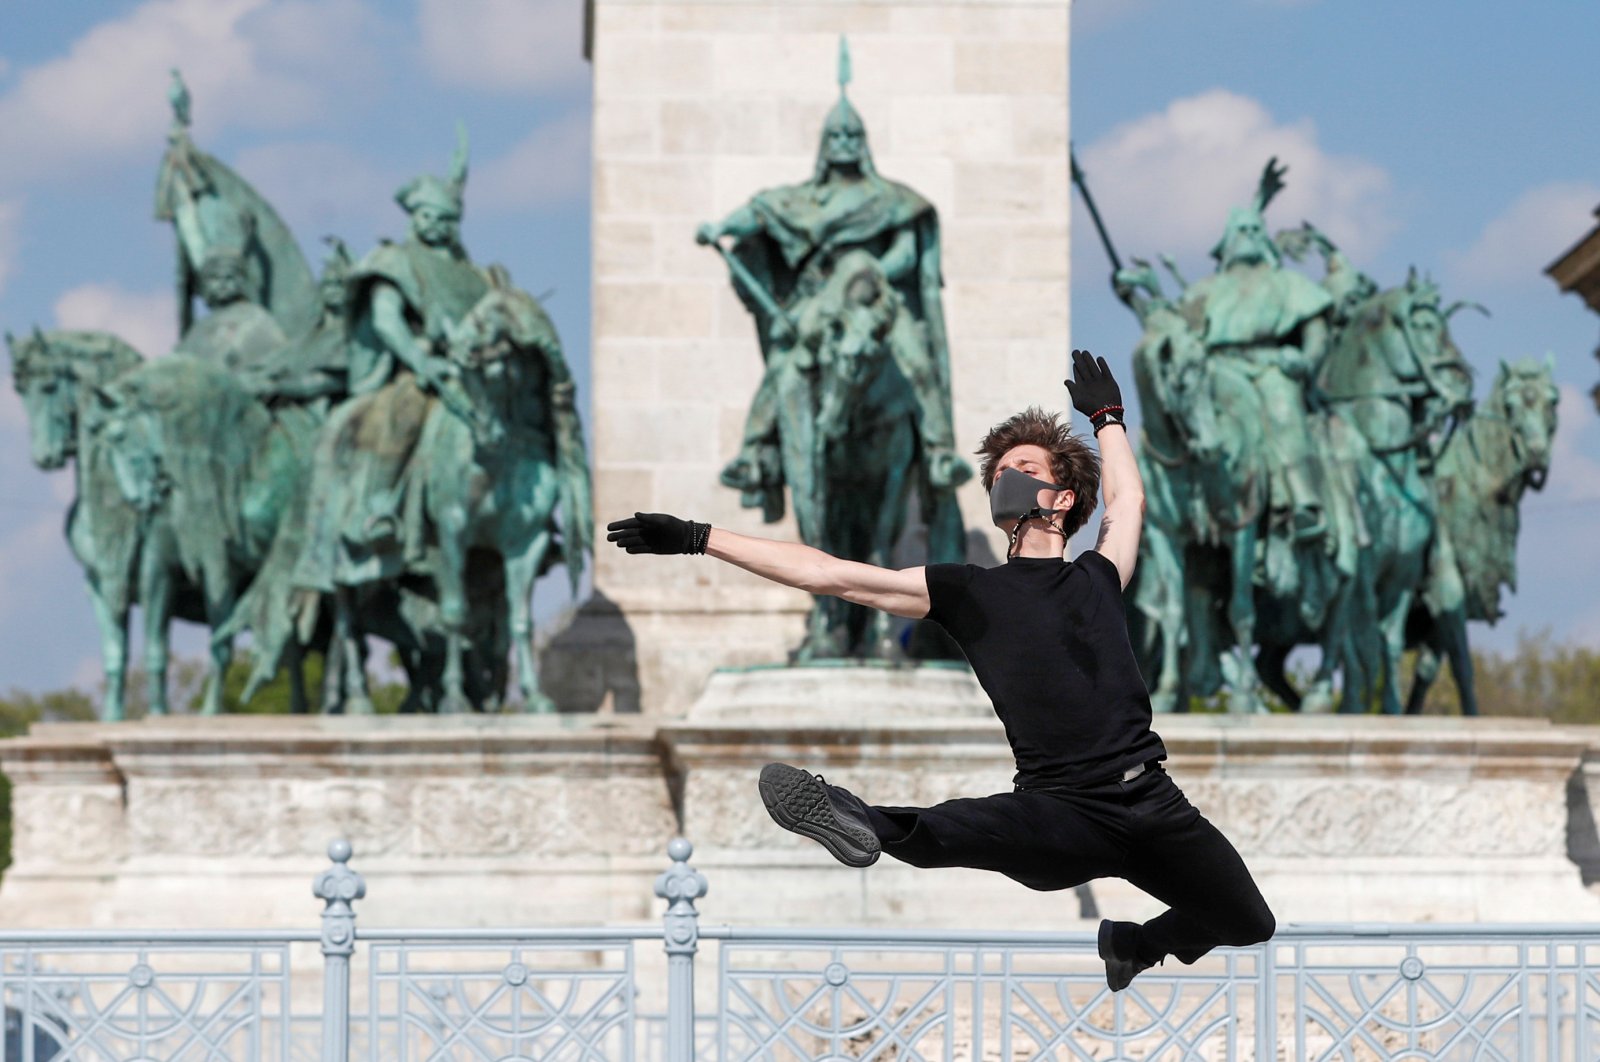 Hungarian ballet dancer Zsolt Kovacs performs a choreographic piece he has designed for the "coronavirus melody," a musical composition created by MIT scientists from a model of the protein structure of SARS-CoV-2, during the coronavirus disease outbreak in Budapest, Hungary, April 28, 2020. (Reuters Photo)